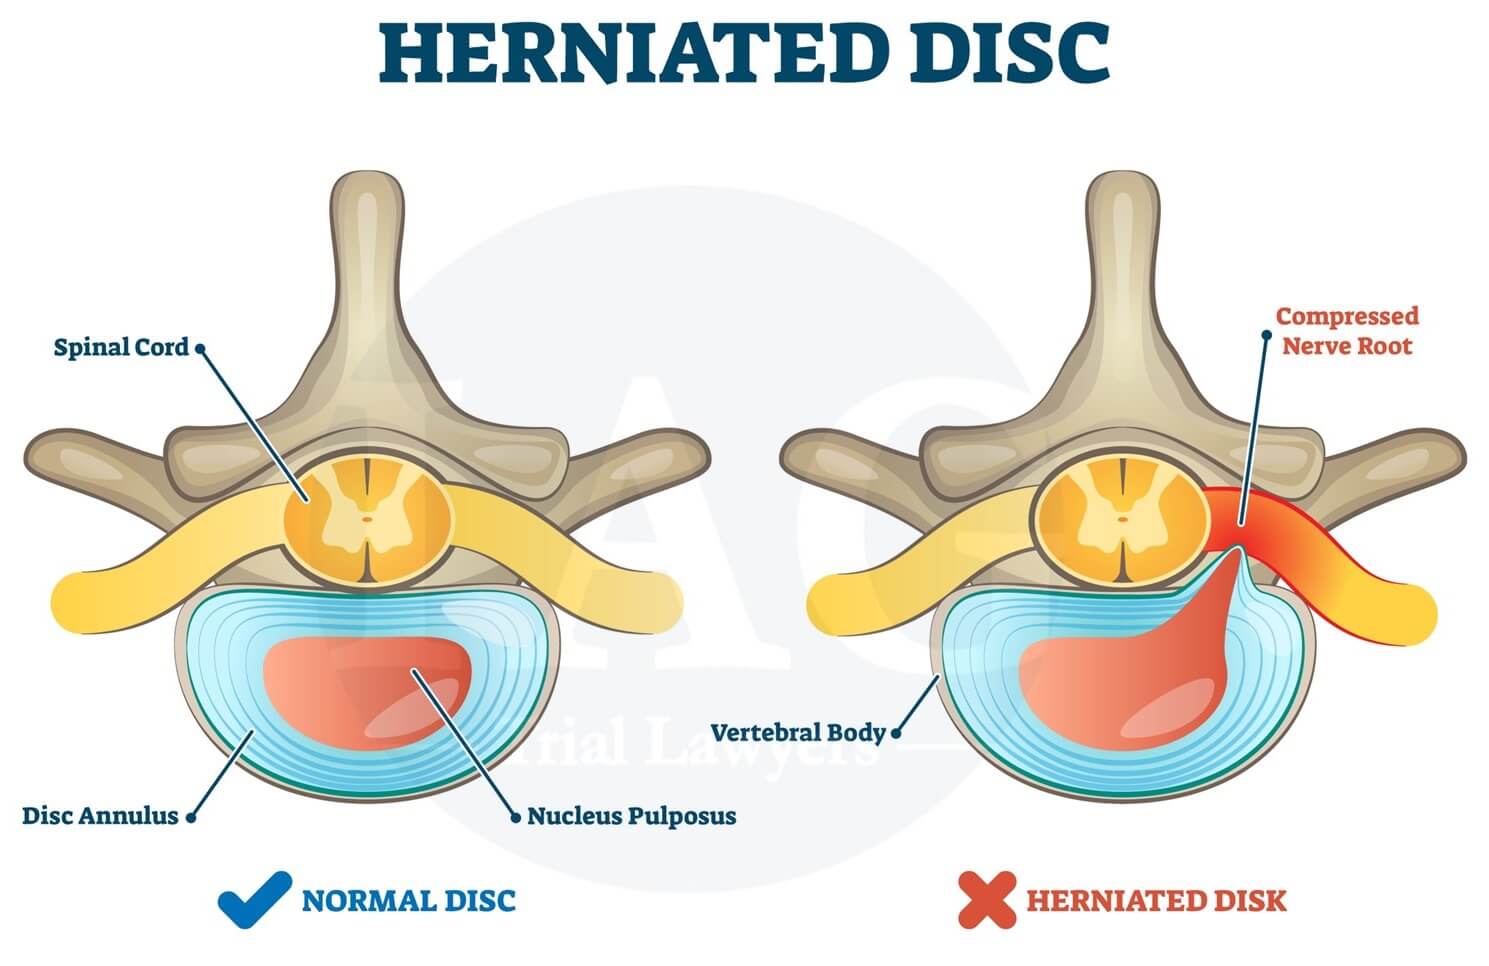 Herniated Disc and Normal Disc